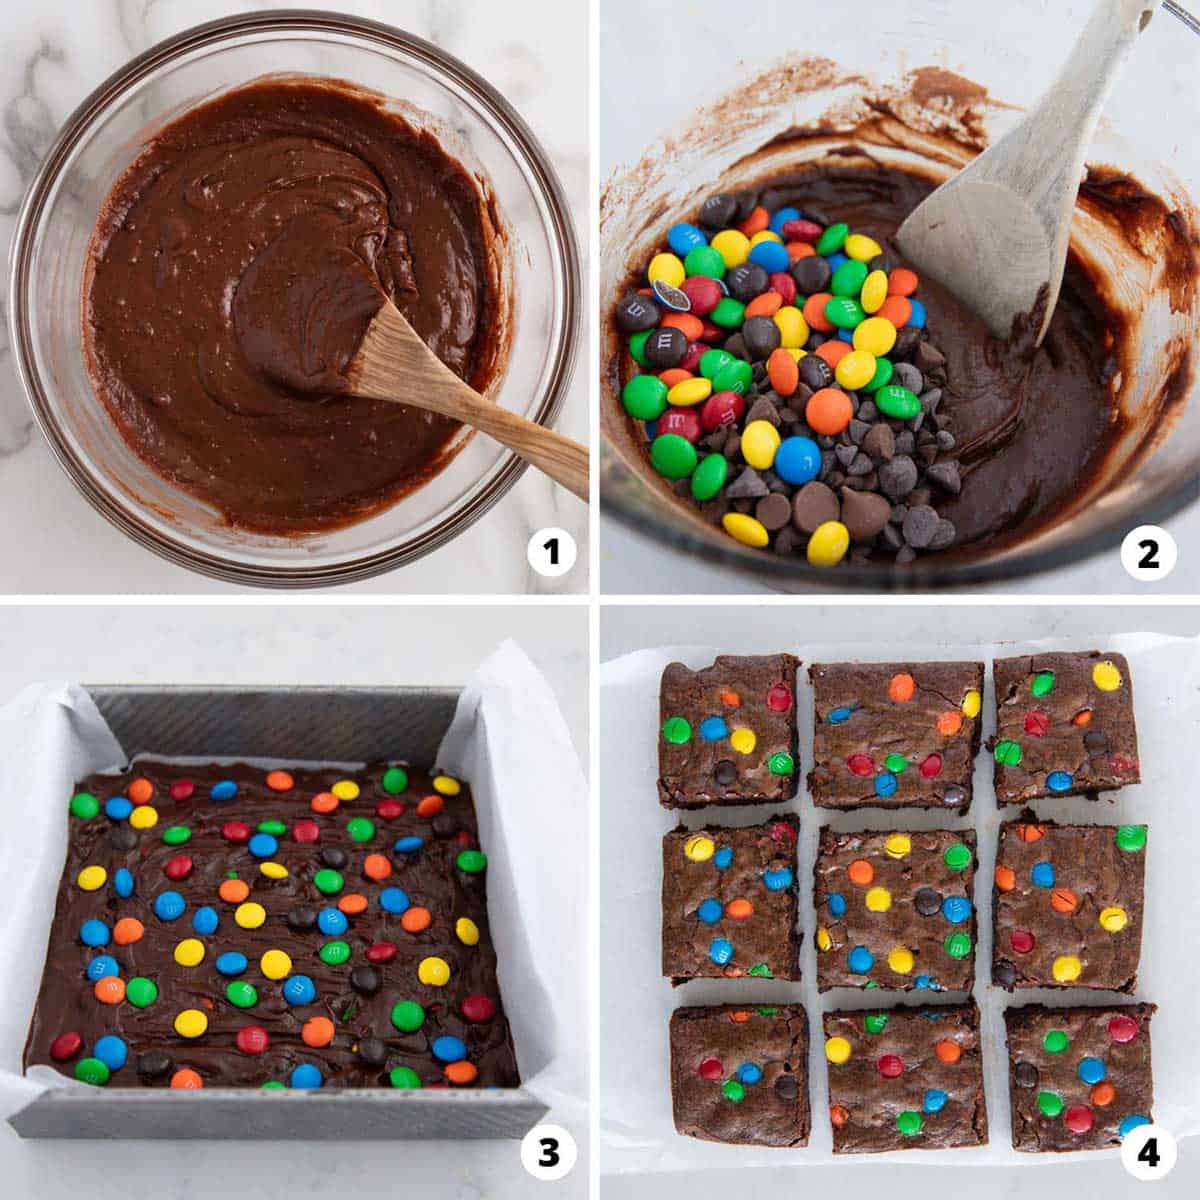 Showing how to make m&m brownies in a 4 step collage.